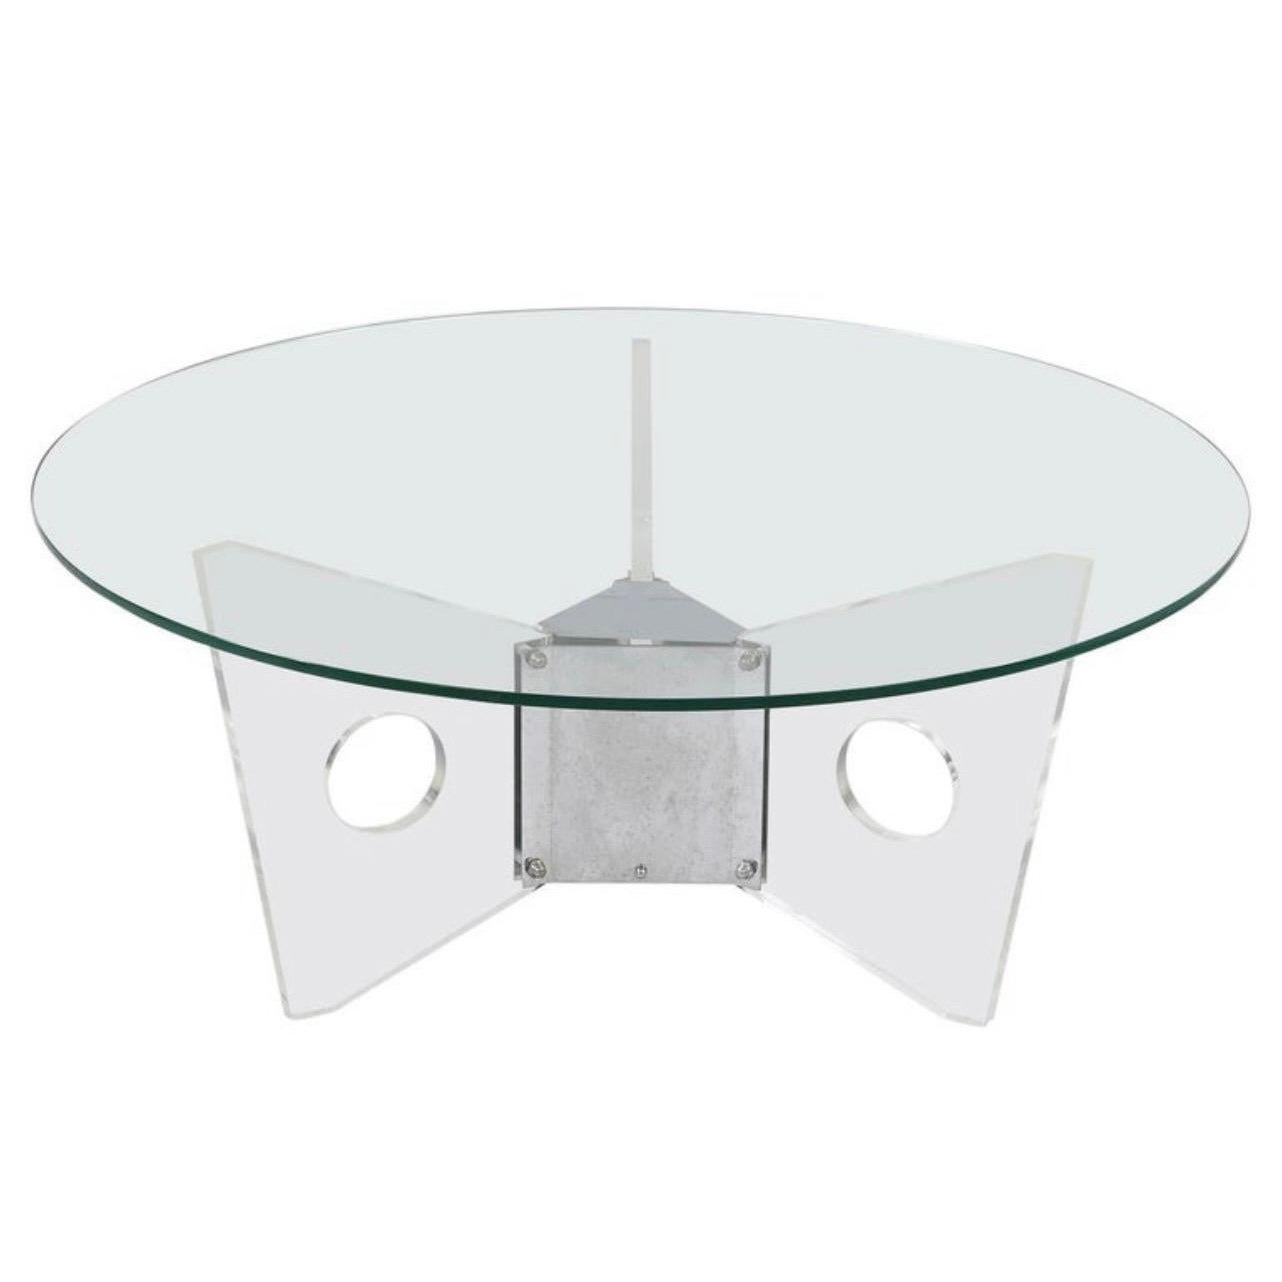 Wonderful Mid-Century Modern Round Glass Top Lucite & Chrome Base Coffee Table